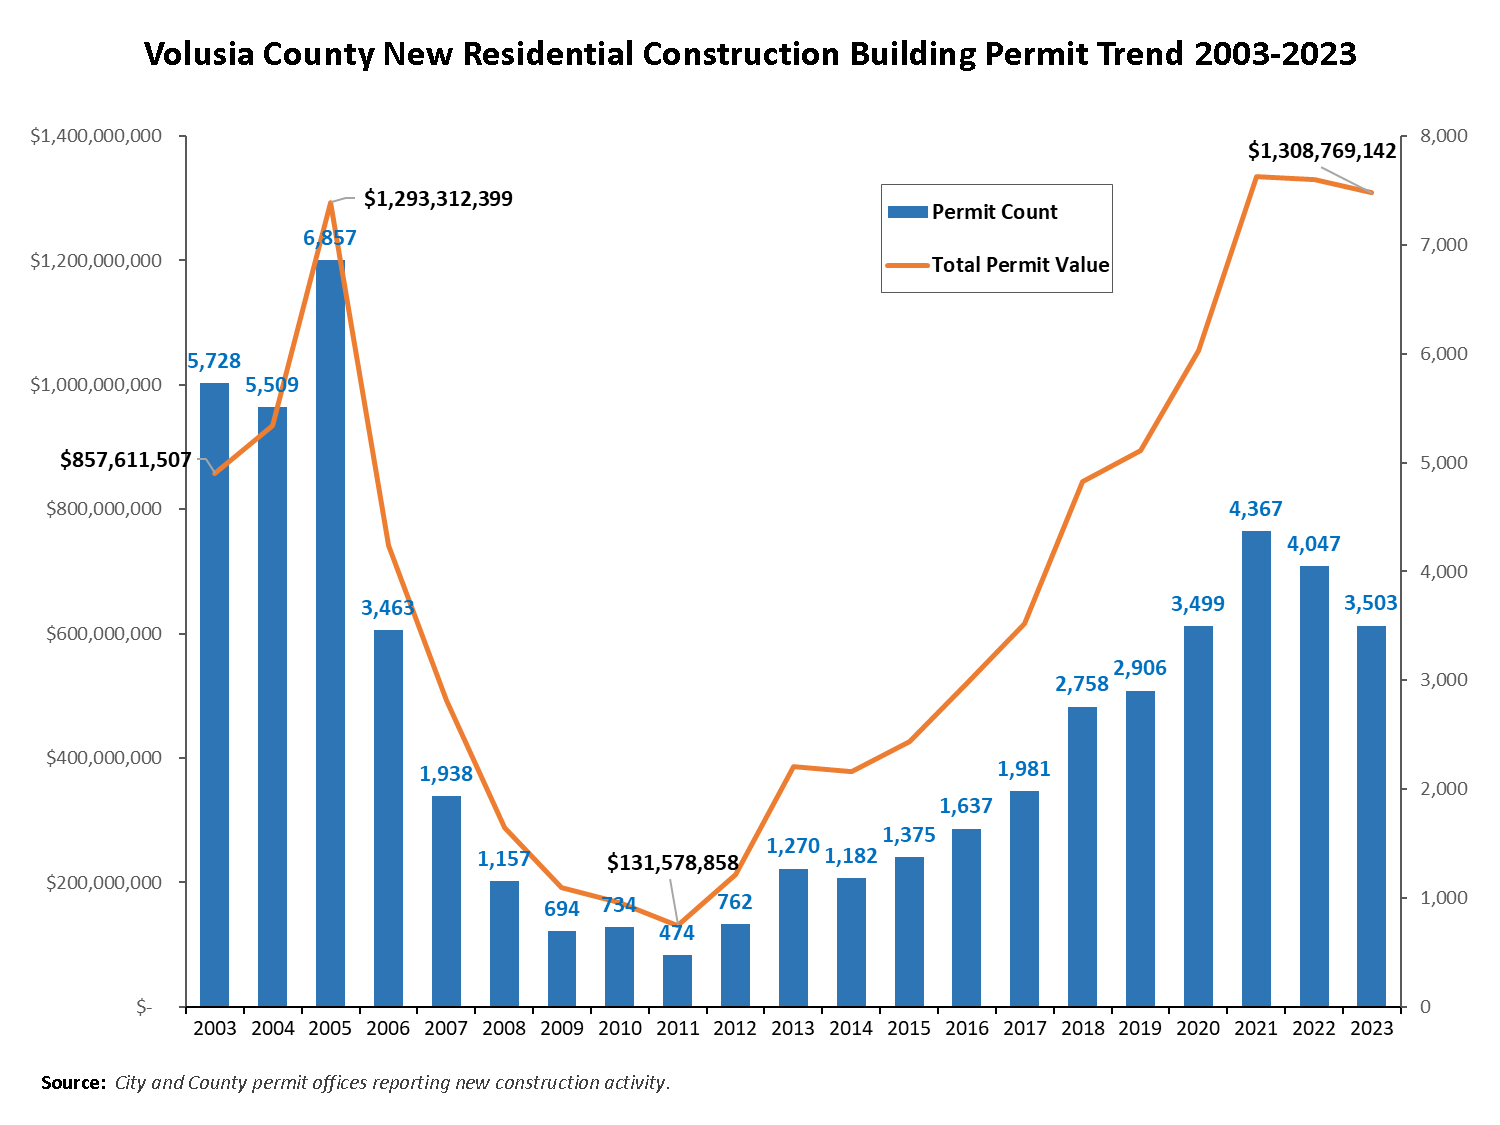 The residential new construction building permit trend chart displays the number and total value of permits issued from 2003 to 2022. In 2003, there were 5,728 permits issued with a value of $857 million. That total peaked in 2005 to 6,857 permits with a value of $1.29 billion. From 2006 to 2011, the number of permits fell sharply to a low of 474 permits in 2011 with a value of $131 million.  From 2012 to 2022, there has been a steady increase in permits with 2022 closing out with 4,047 permits issued with a value of $1.33 billion, indicating the average value of permits increased from approximately $188,611 in 2005 to approximately $328,550. 